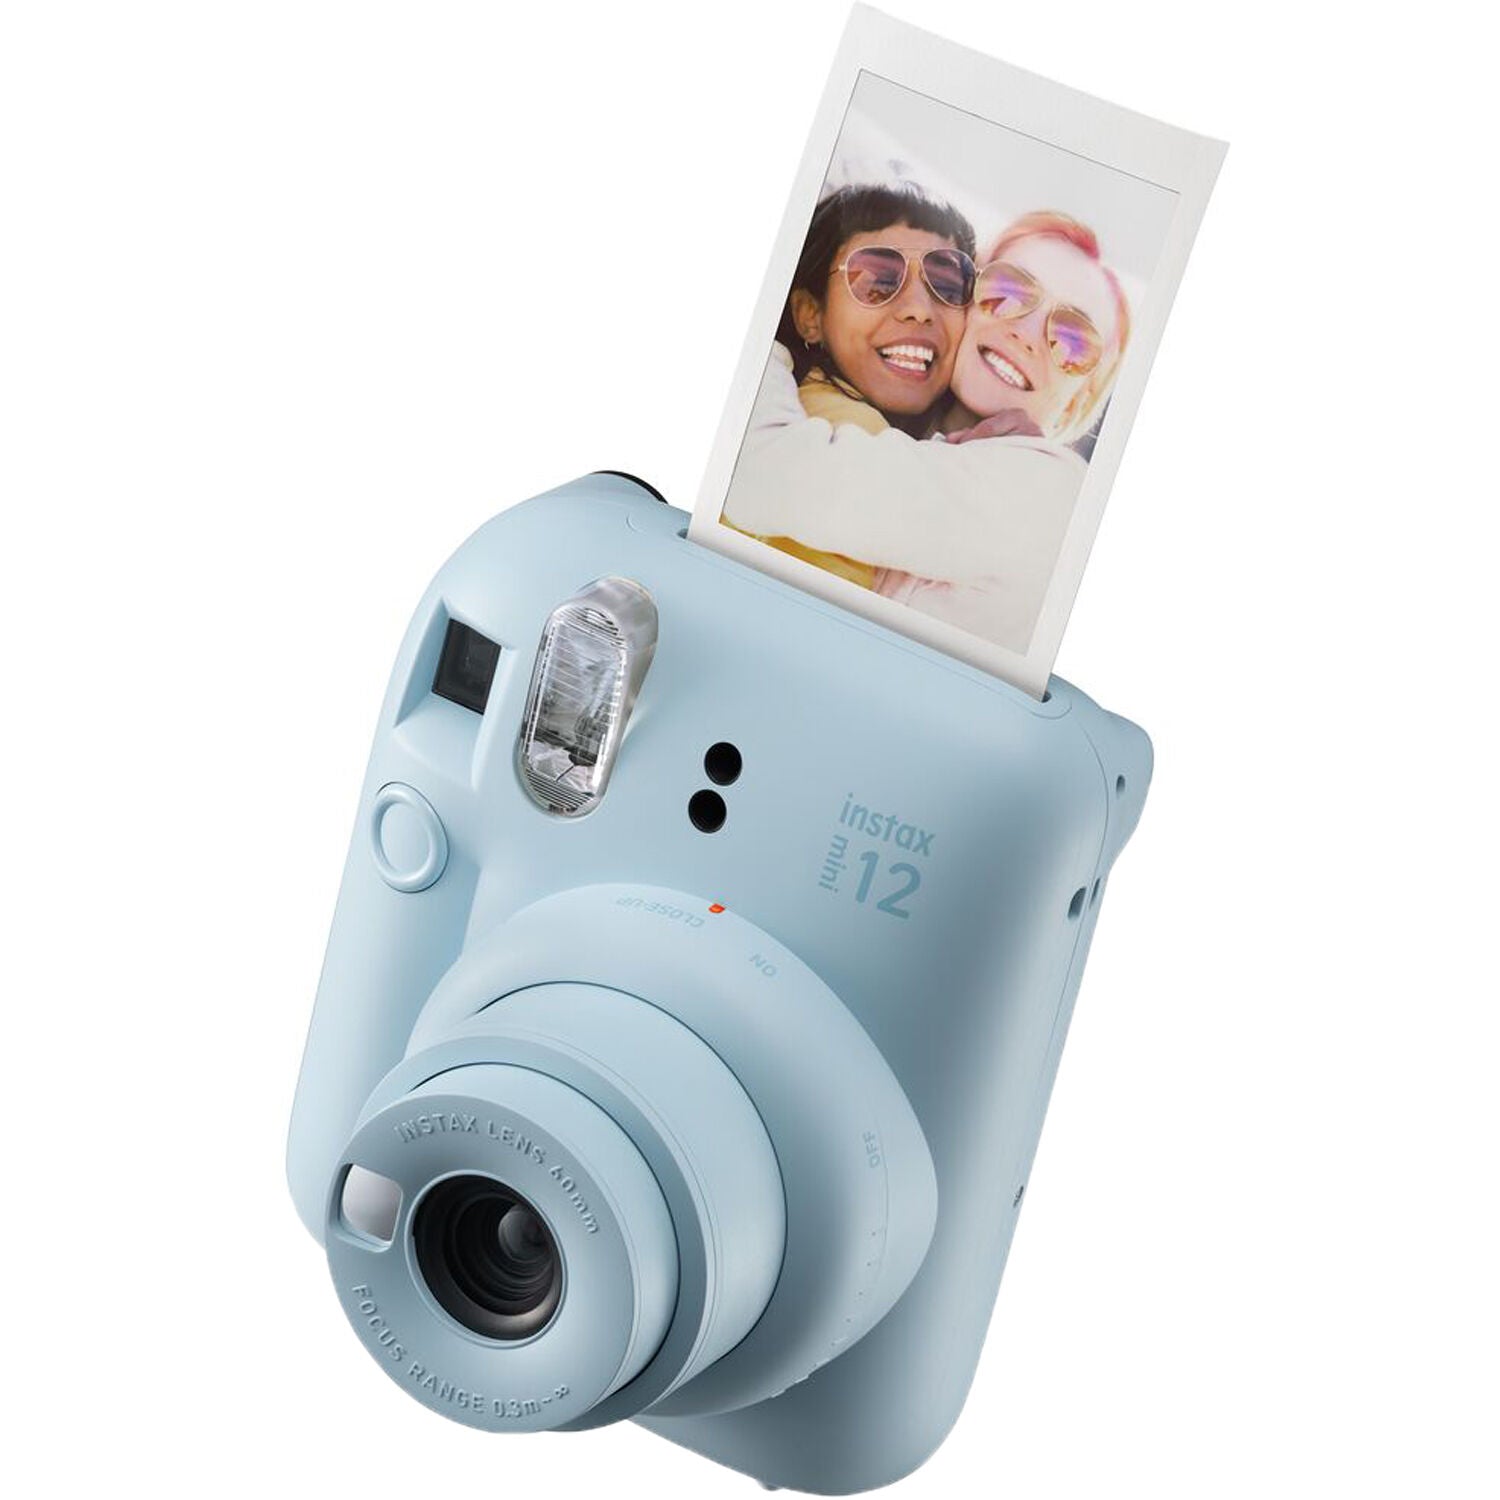 FUJIFILM INSTAX Mini 12 Instant Film Camera with blue shell bag and 20 Shots Instant film (Pastel Blue)